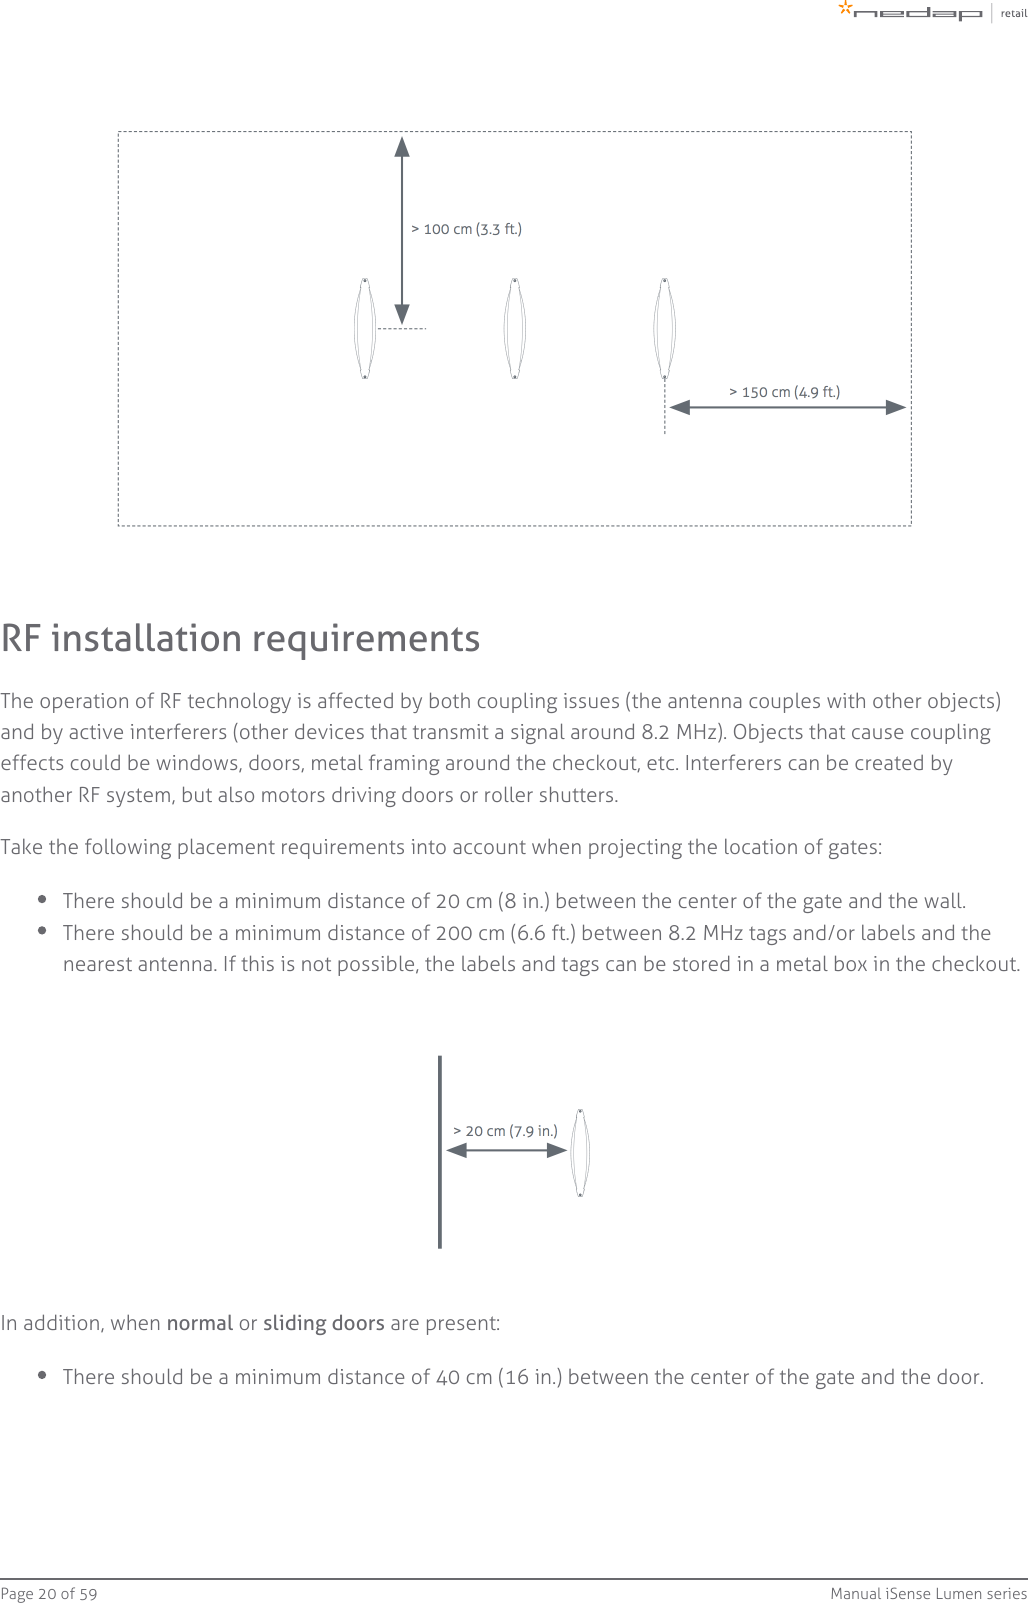 Page   of 20 59 Manual iSense Lumen seriesRF installation requirementsThe operation of RF technology is affected by both coupling issues (the antenna couples with other objects)and by active interferers (other devices that transmit a signal around 8.2 MHz). Objects that cause couplingeffects could be windows, doors, metal framing around the checkout, etc. Interferers can be created byanother RF system, but also motors driving doors or roller shutters.Take the following placement requirements into account when projecting the location of gates:There should be a minimum distance of 20 cm (8 in.) between the center of the gate and the wall.There should be a minimum distance of 200 cm (6.6 ft.) between 8.2 MHz tags and/or labels and thenearest antenna. If this is not possible, the labels and tags can be stored in a metal box in the checkout.In addition, when   or   are present:normal sliding doorsThere should be a minimum distance of 40 cm (16 in.) between the center of the gate and the door.